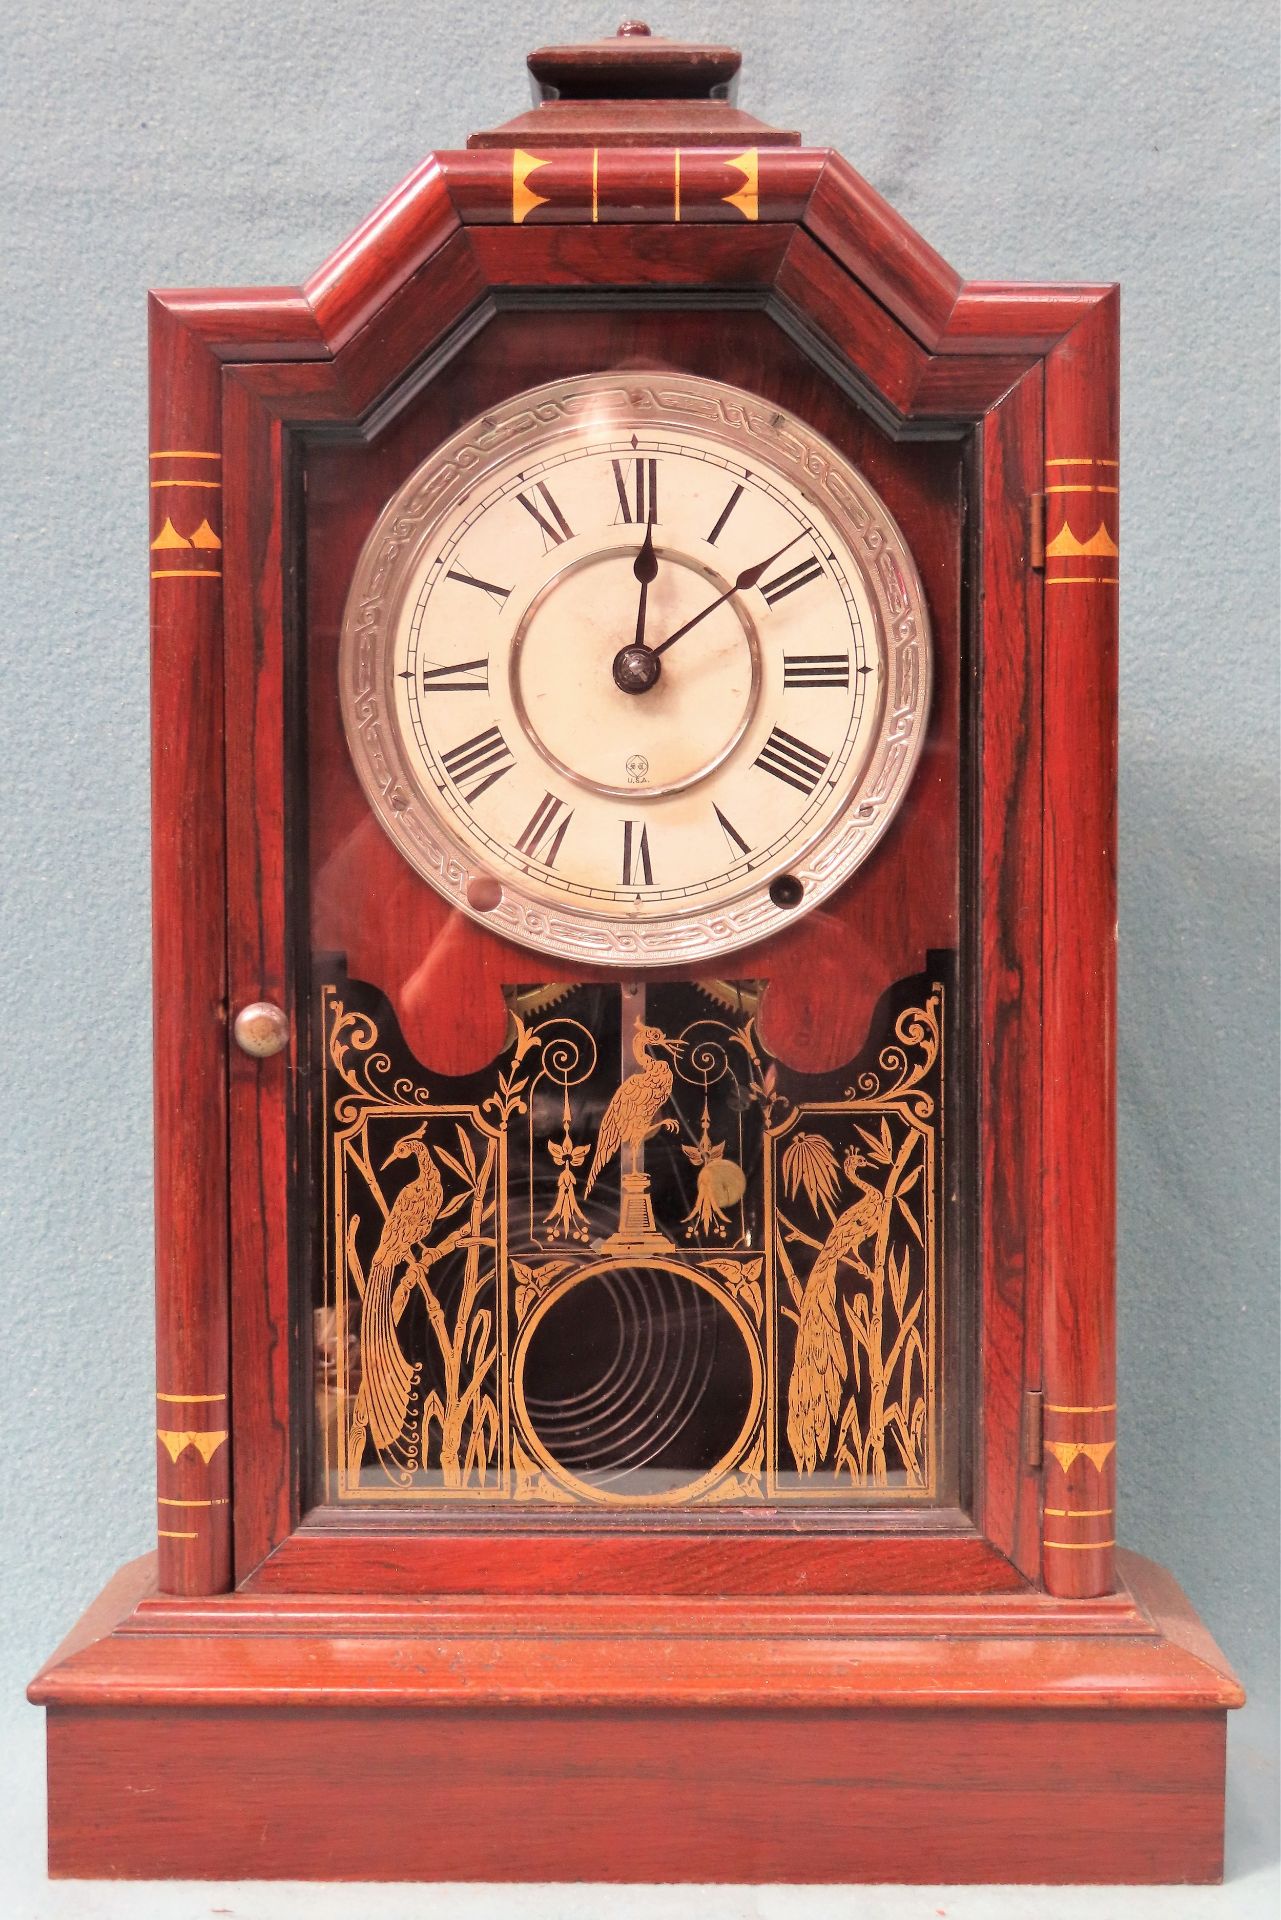 Late 19th/Early 20th century Rosewood cased Seth Thomas American mantle clock. App. 51cm H